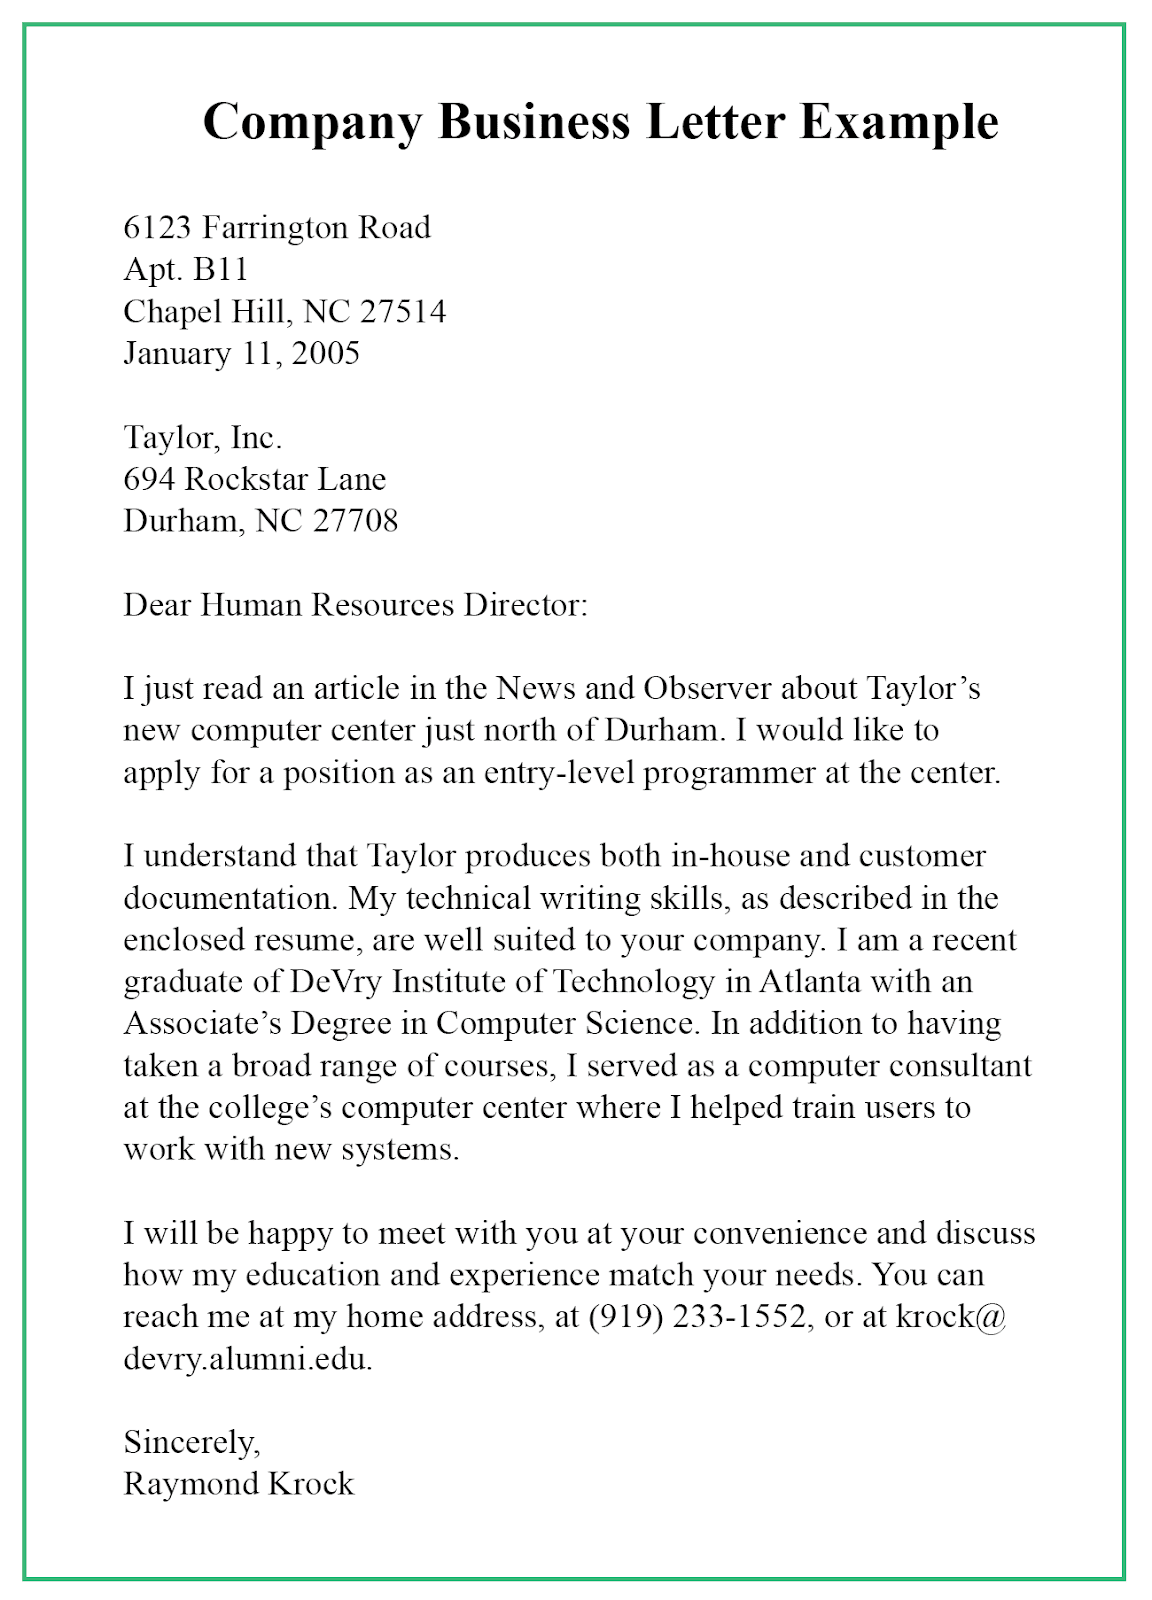 business plan letter example